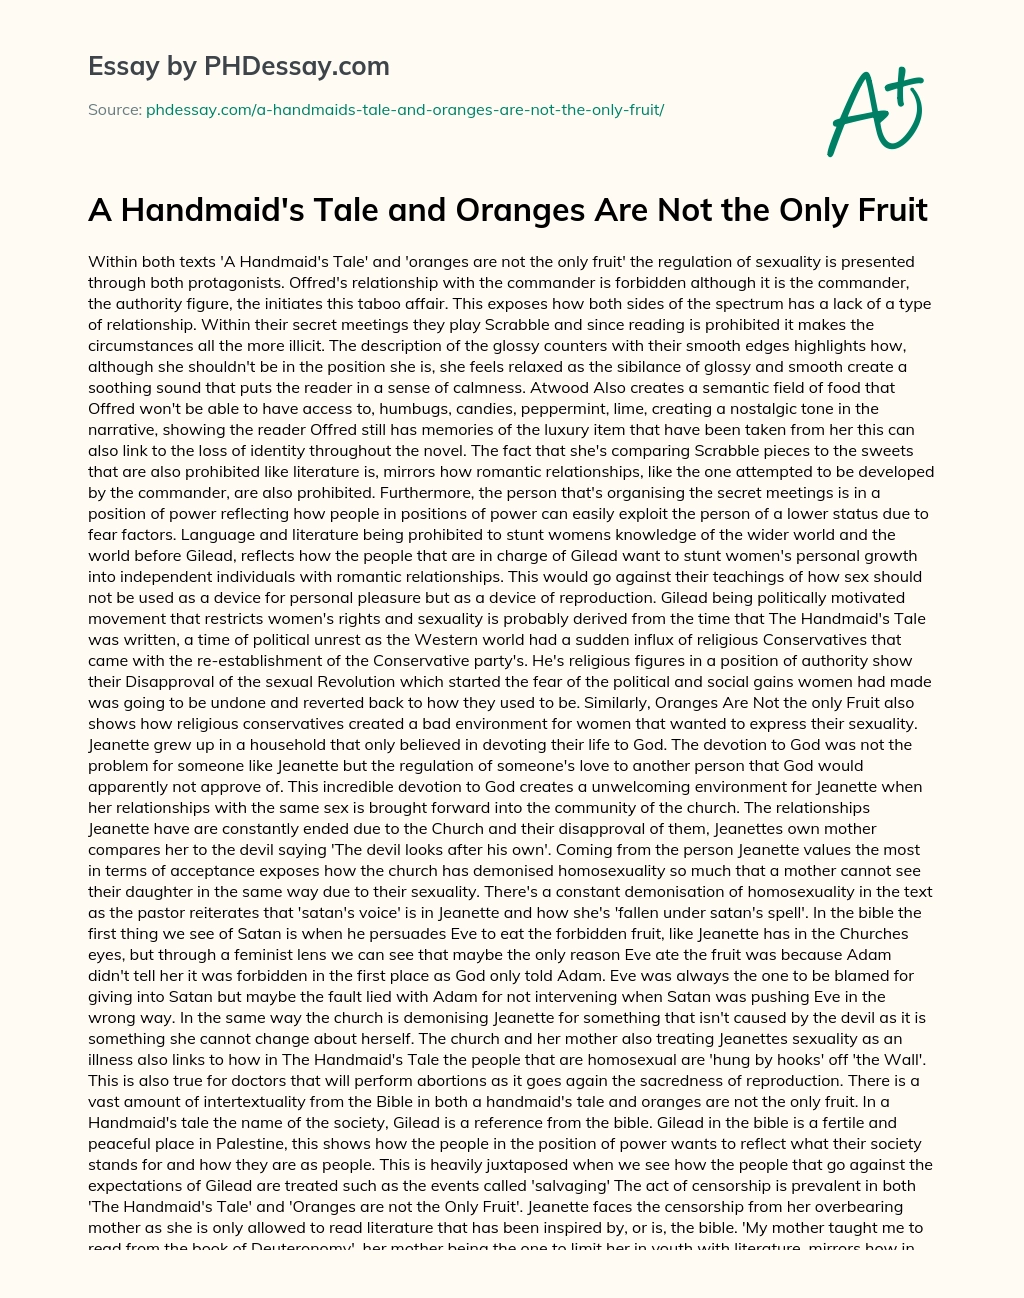 A Handmaid’s Tale and Oranges Are Not the Only Fruit essay